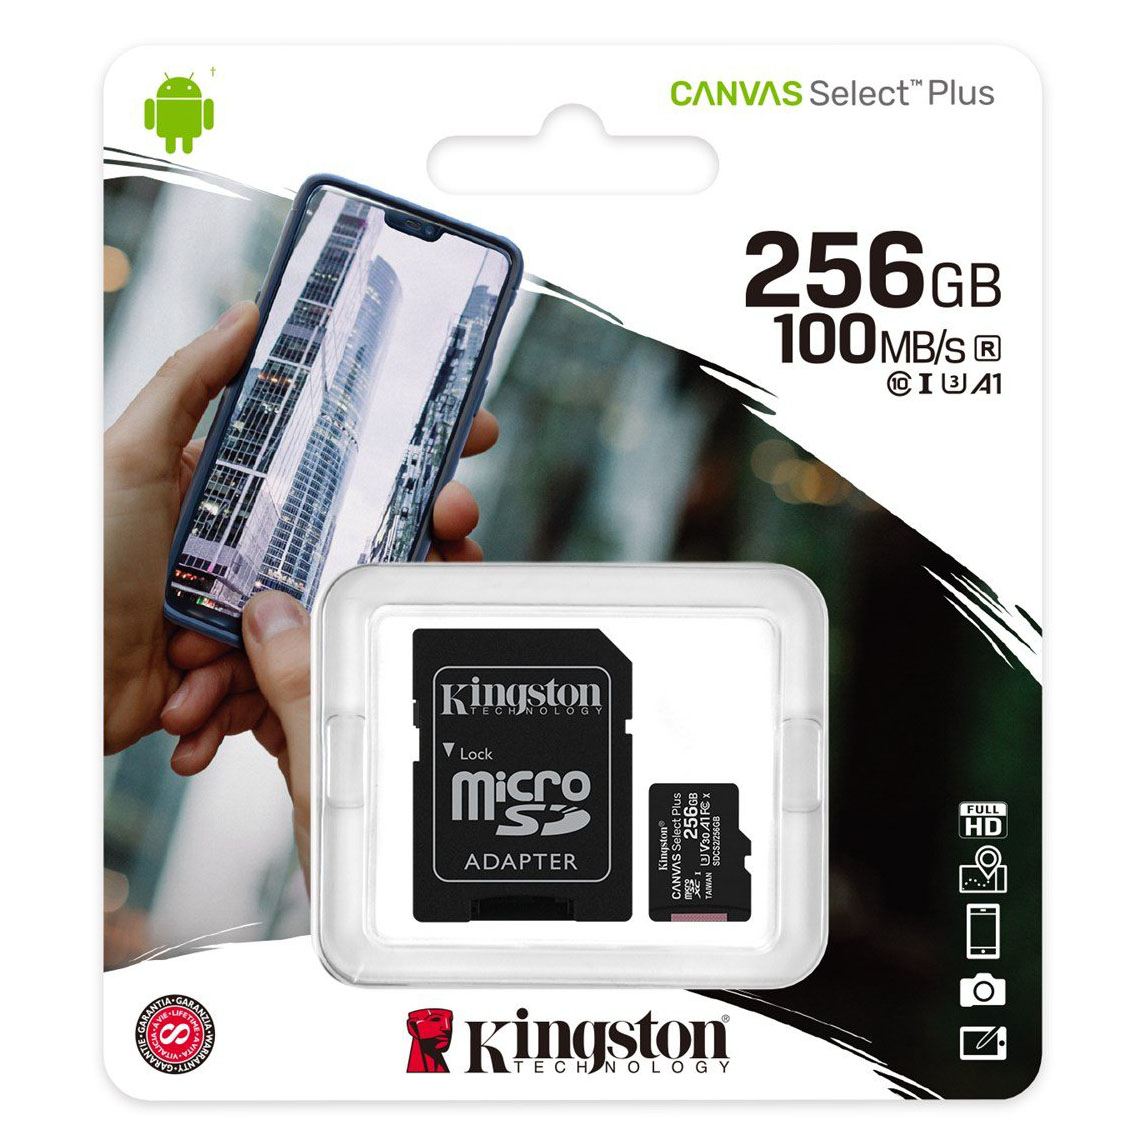 memory-card-microsdxc-kingston-canvas-select-plus-android-a1-2C-with-adapter-2C-256gb-2C-clasa-10---uhs-1-u1-2C-sdcs2-256gb--28eu-blister-29